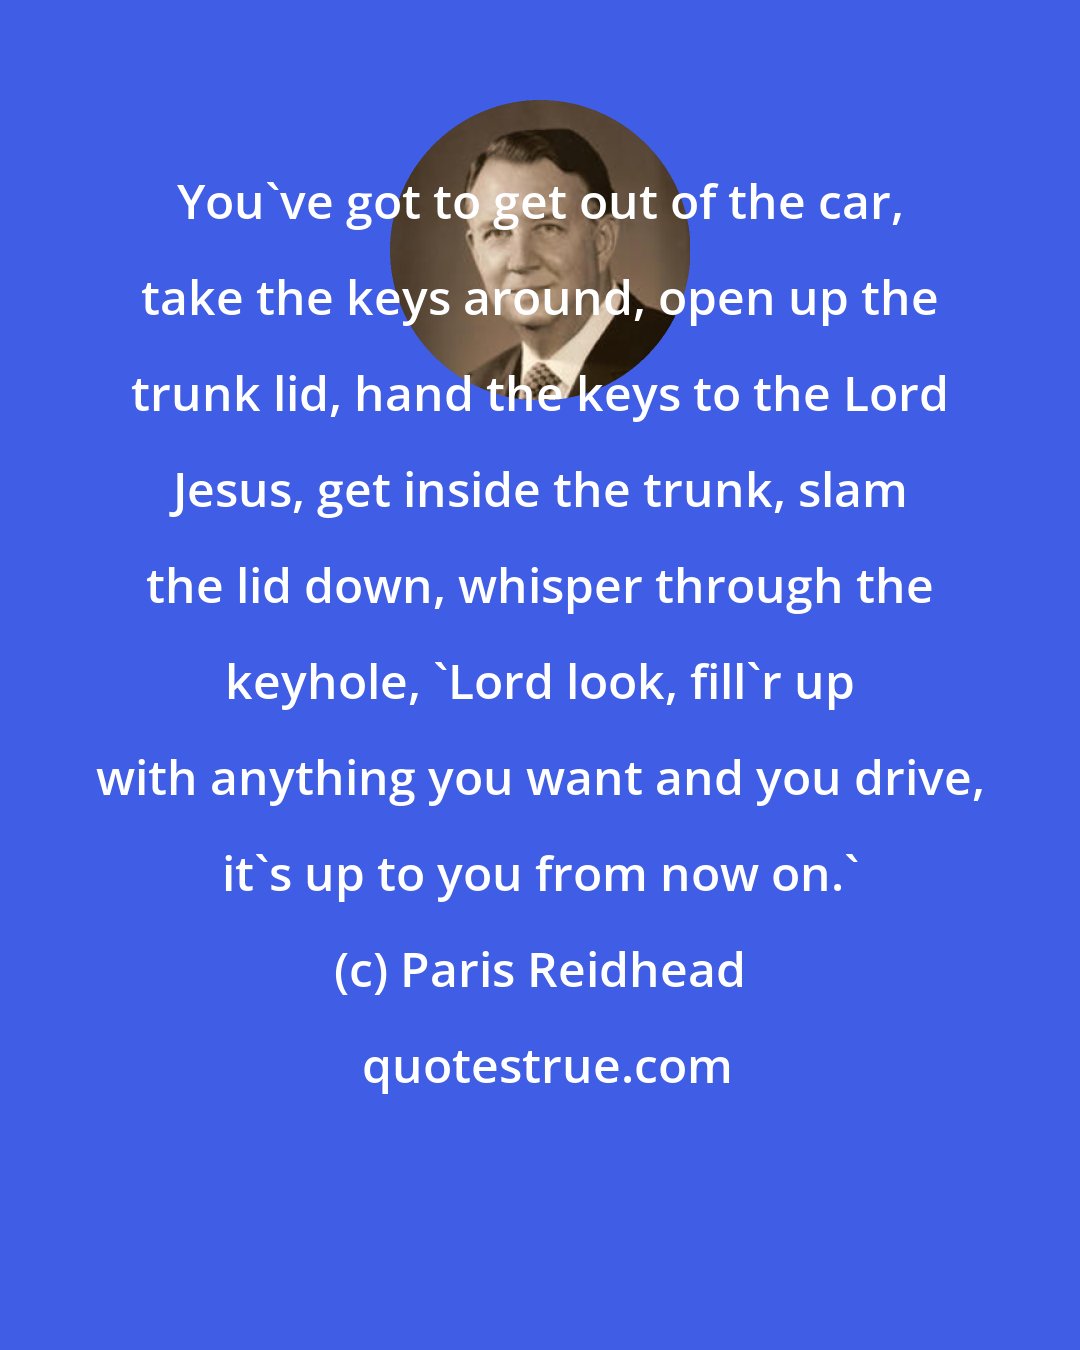 Paris Reidhead: You've got to get out of the car, take the keys around, open up the trunk lid, hand the keys to the Lord Jesus, get inside the trunk, slam the lid down, whisper through the keyhole, 'Lord look, fill'r up with anything you want and you drive, it's up to you from now on.'